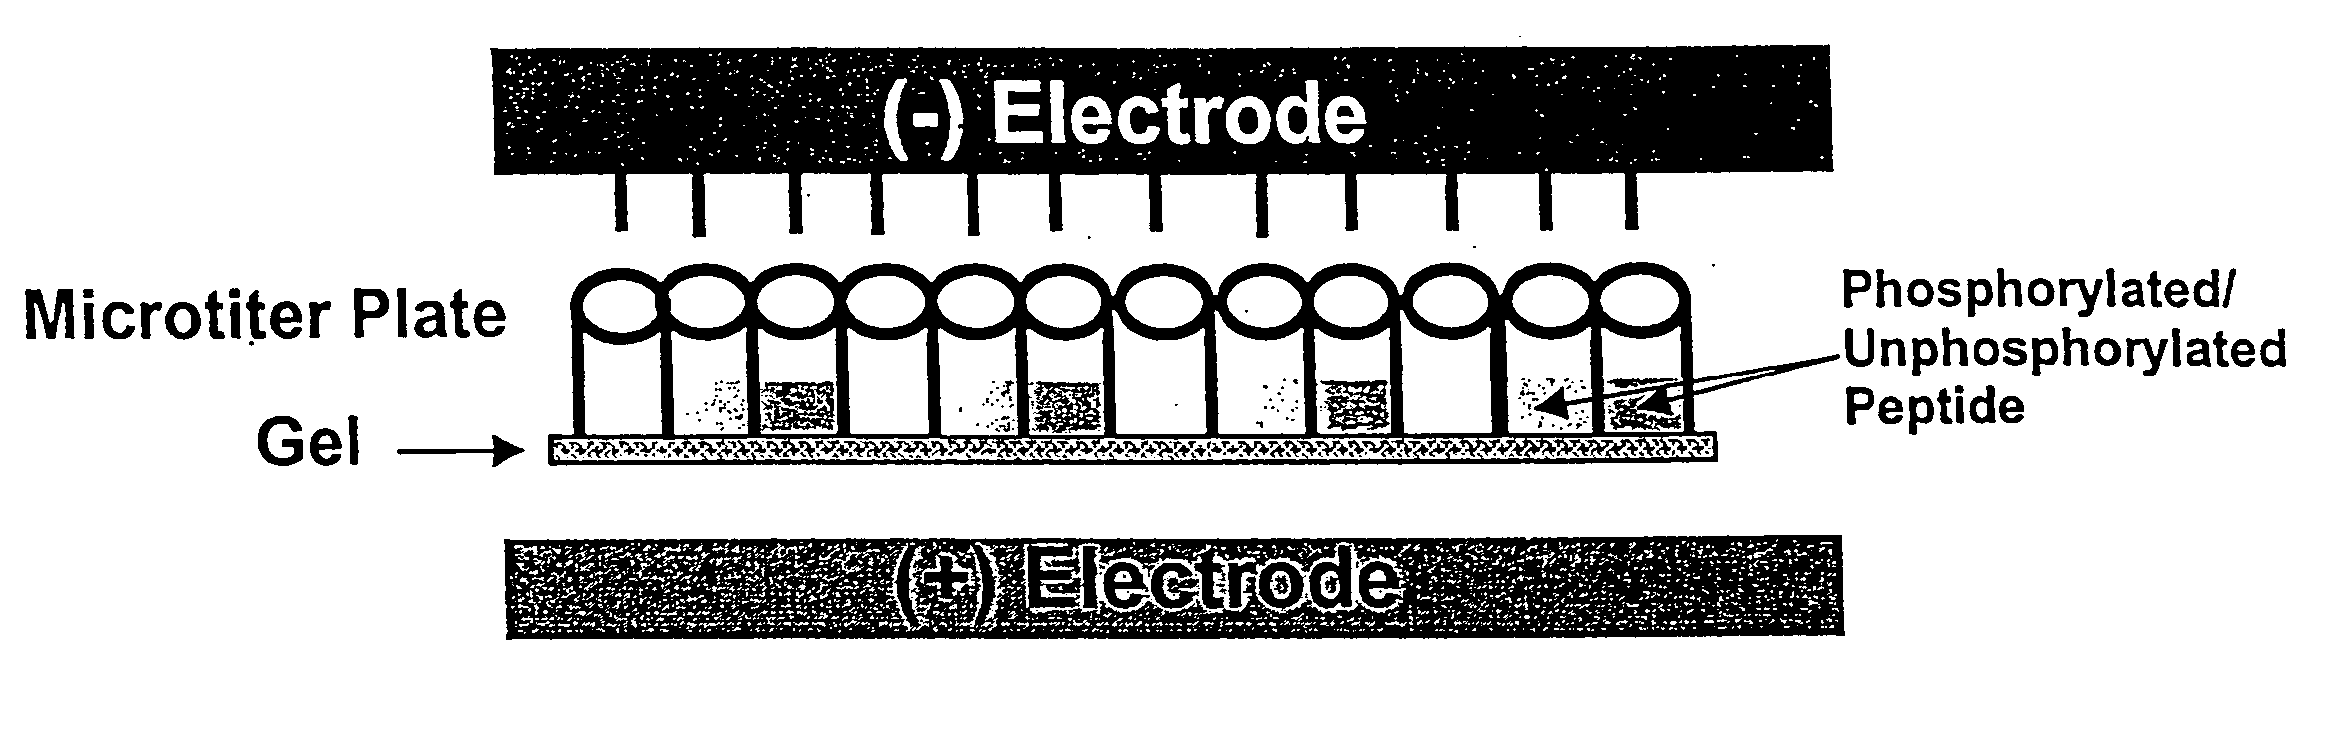 Microtiter plate format device and methods for separating differently charged molecules using an electric field